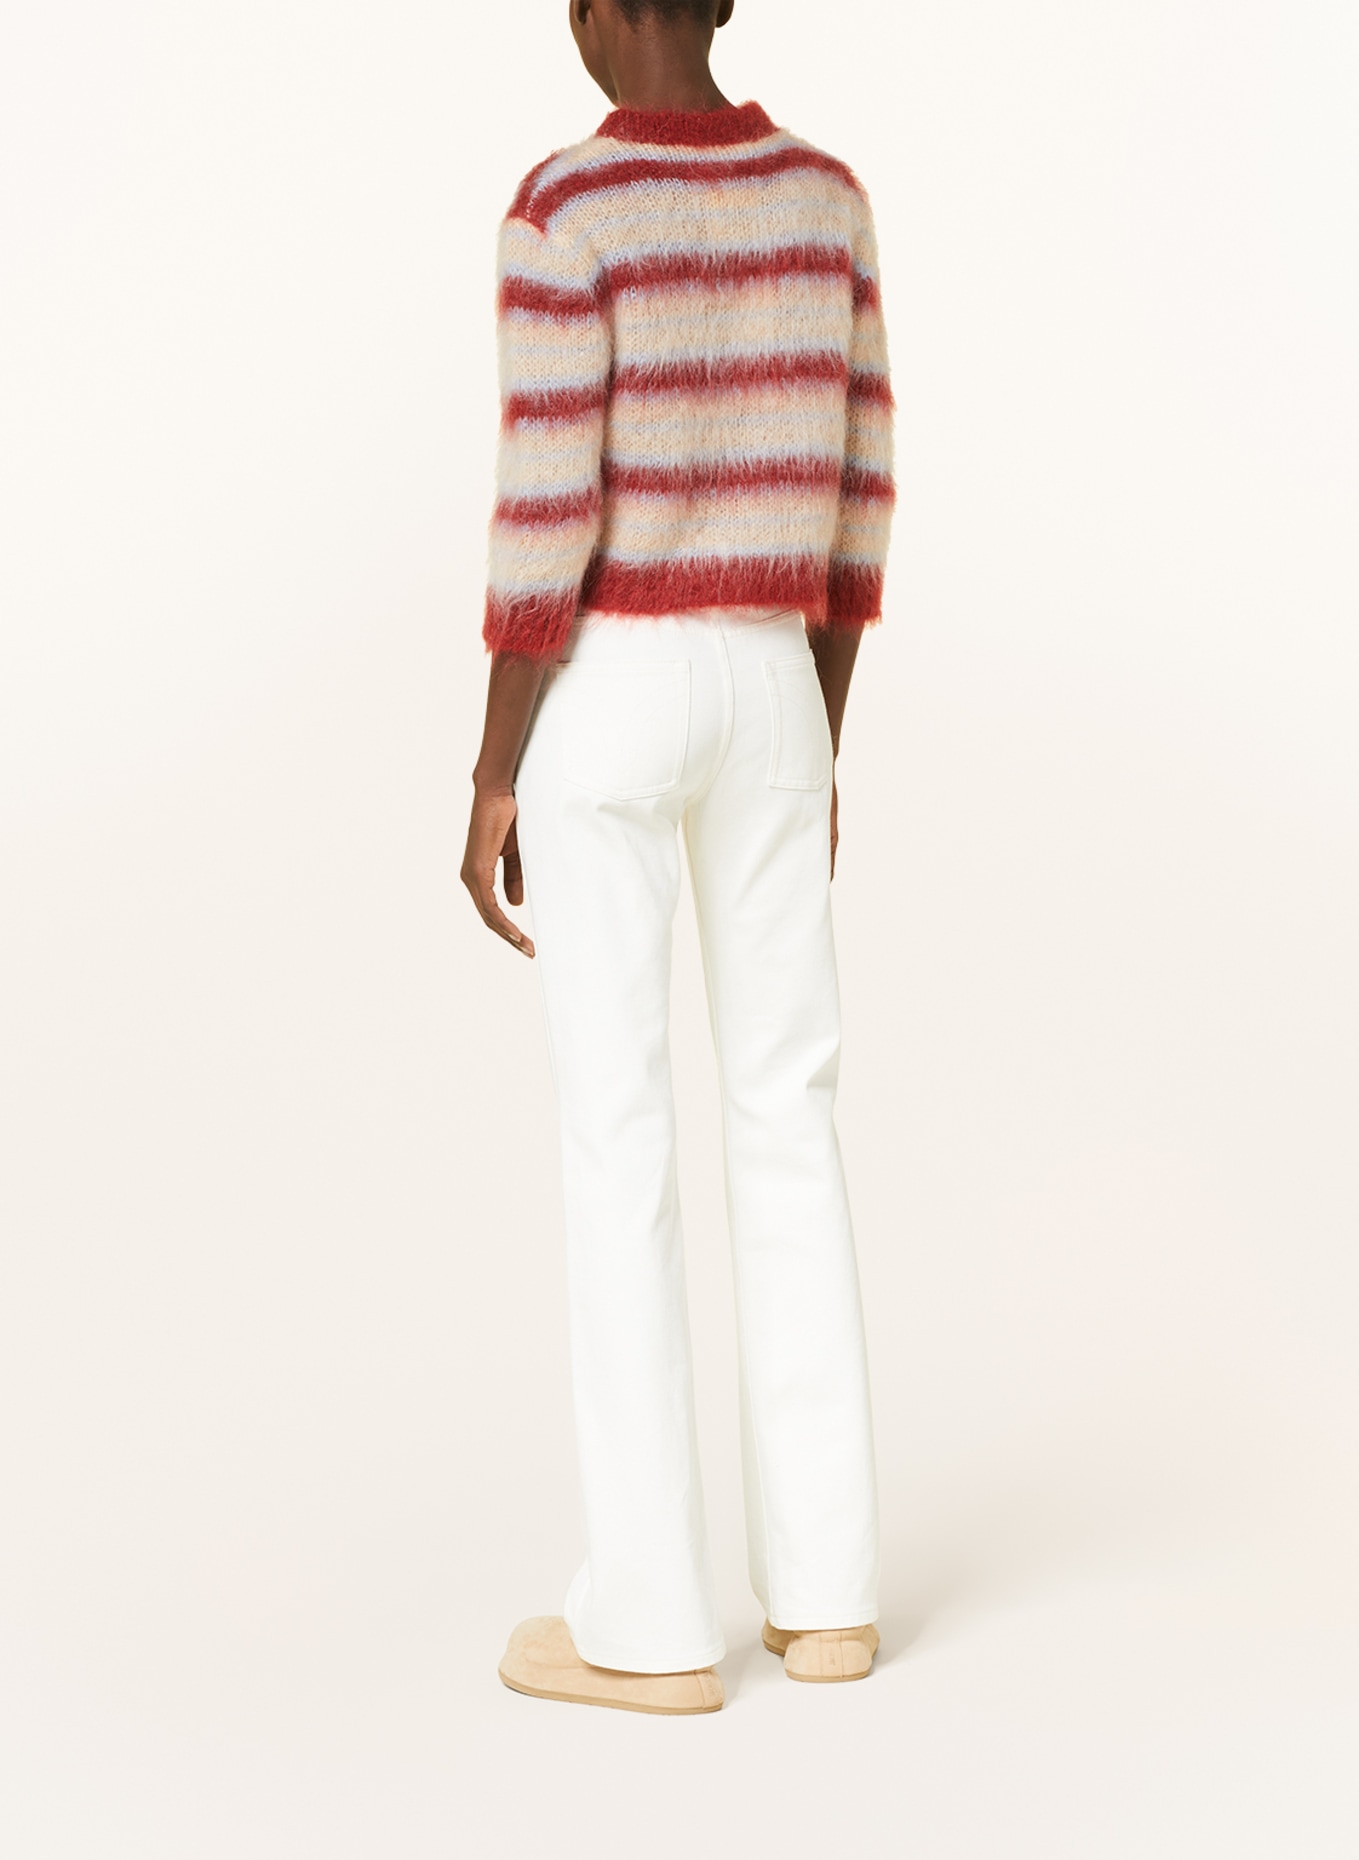 MARNI Cardigan with mohair, Color: CREAM/ LIGHT BLUE/ DARK RED (Image 3)